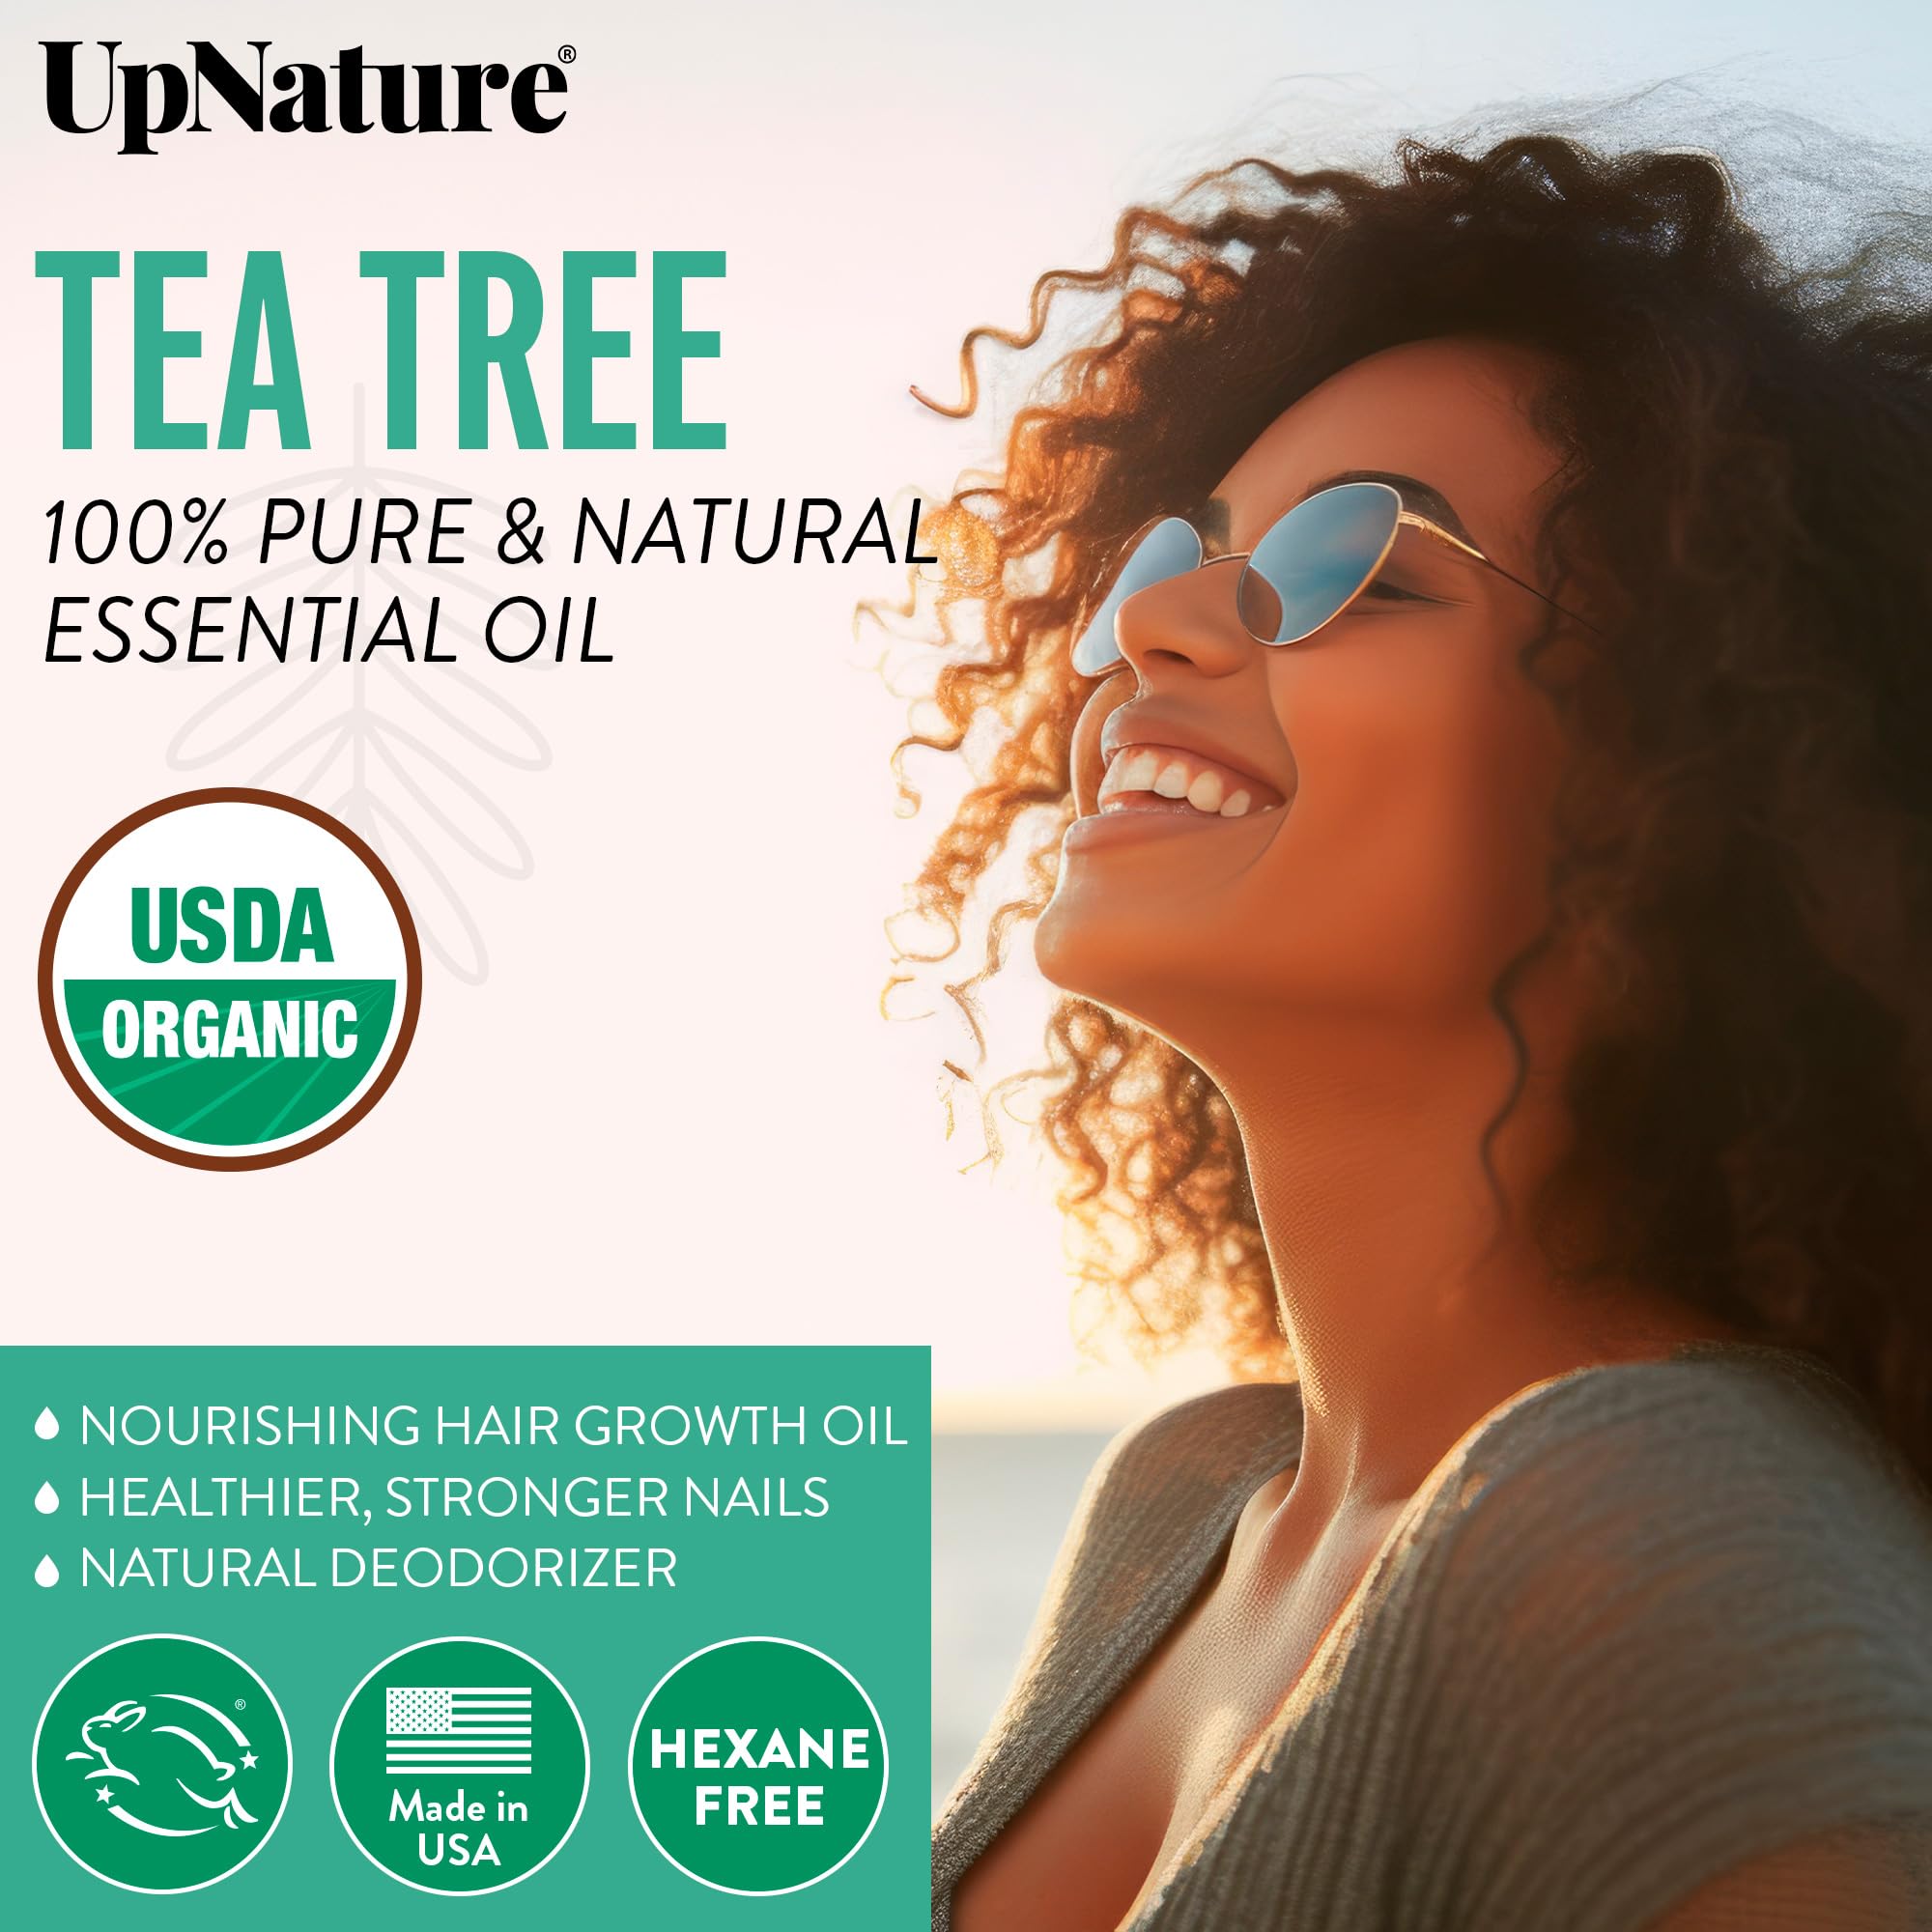 USDA Certified Organic Tea Tree Essential Oil 2oz   100% Natural & Pure Tea Tree Oil for Skin Care, Hair Growth Serum & Healthy Toenail - Premium Quality Aromatherapy Oil for Hair Skin and Nails